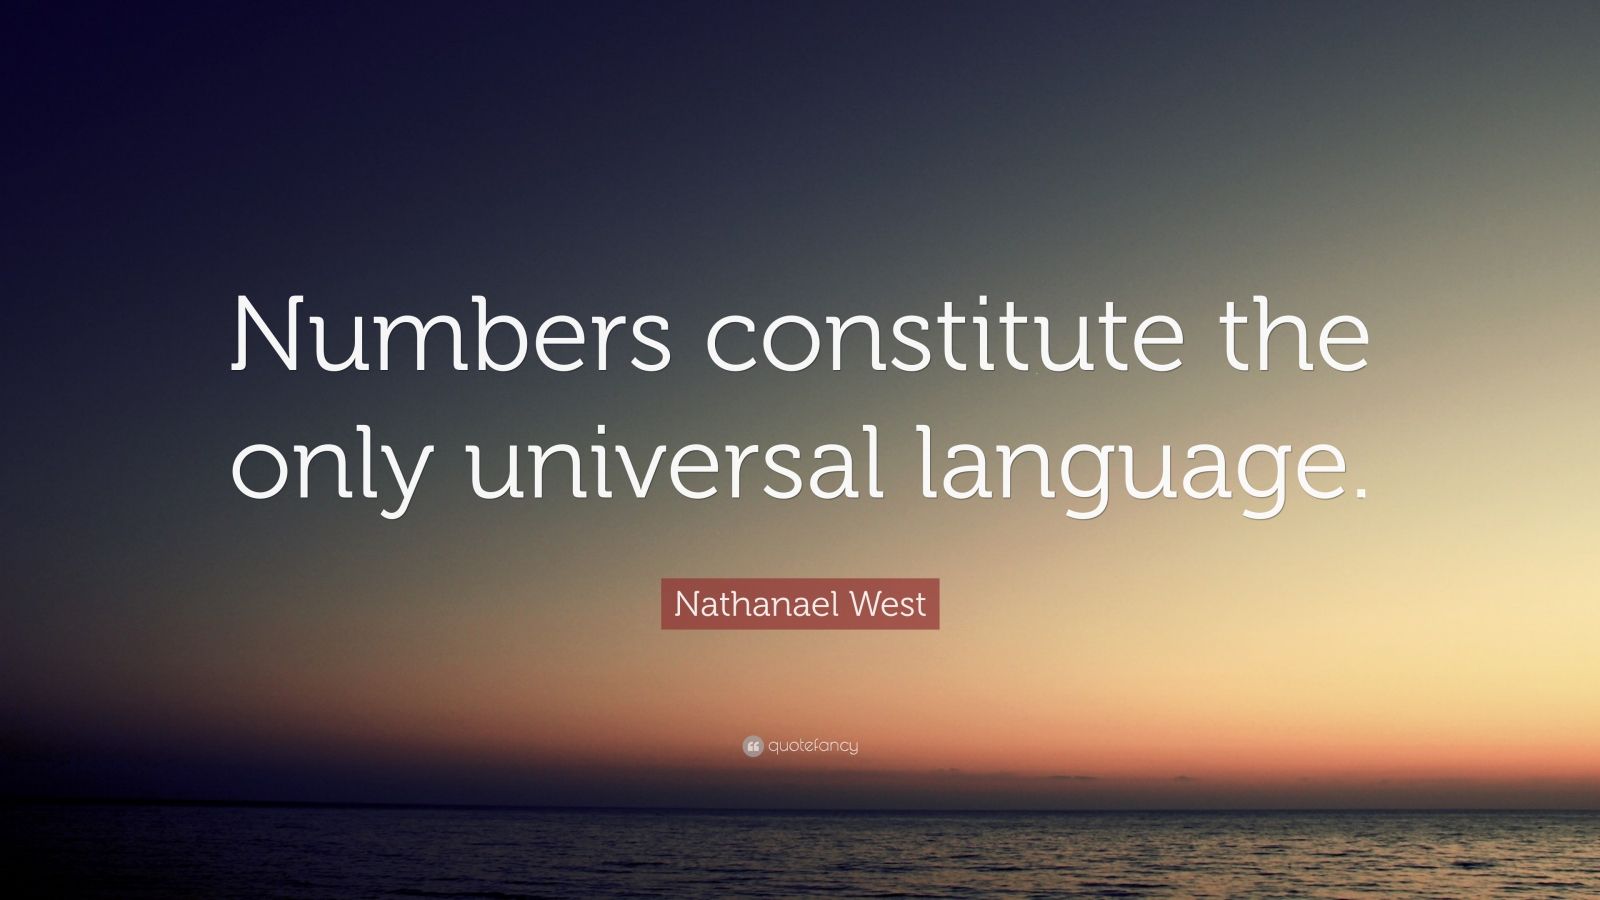 Nathanael West Quote: “Numbers constitute the only universal language